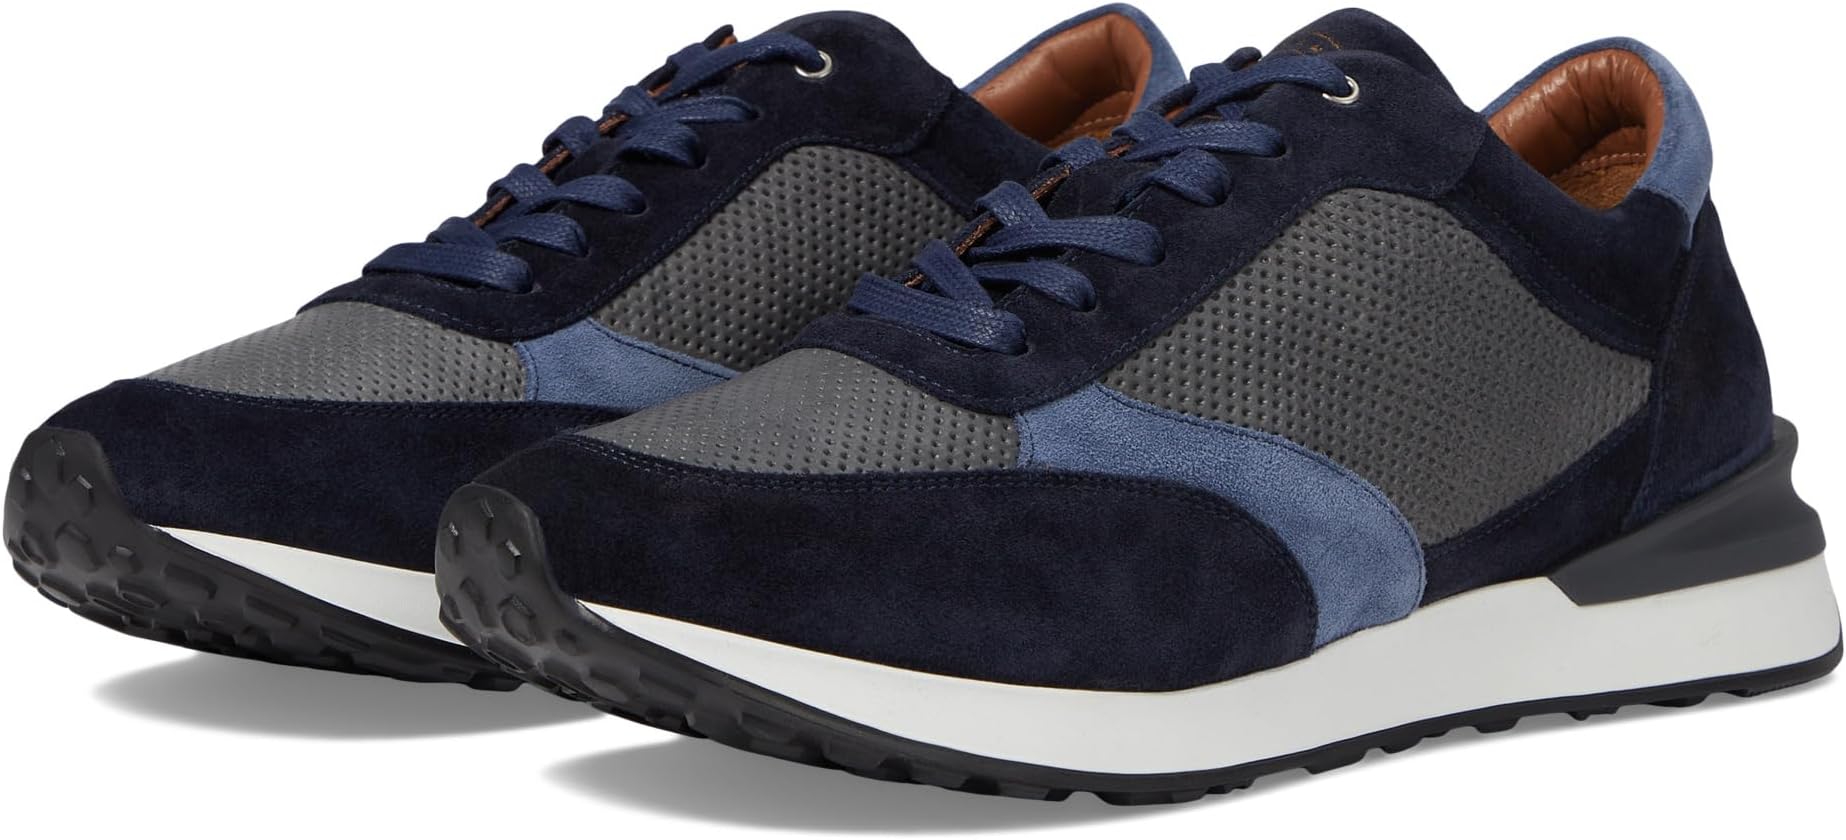 Кроссовки Briggs Perfed Lace-Up Johnston & Murphy Collection, цвет Navy/Gray/Blue Italian Suede